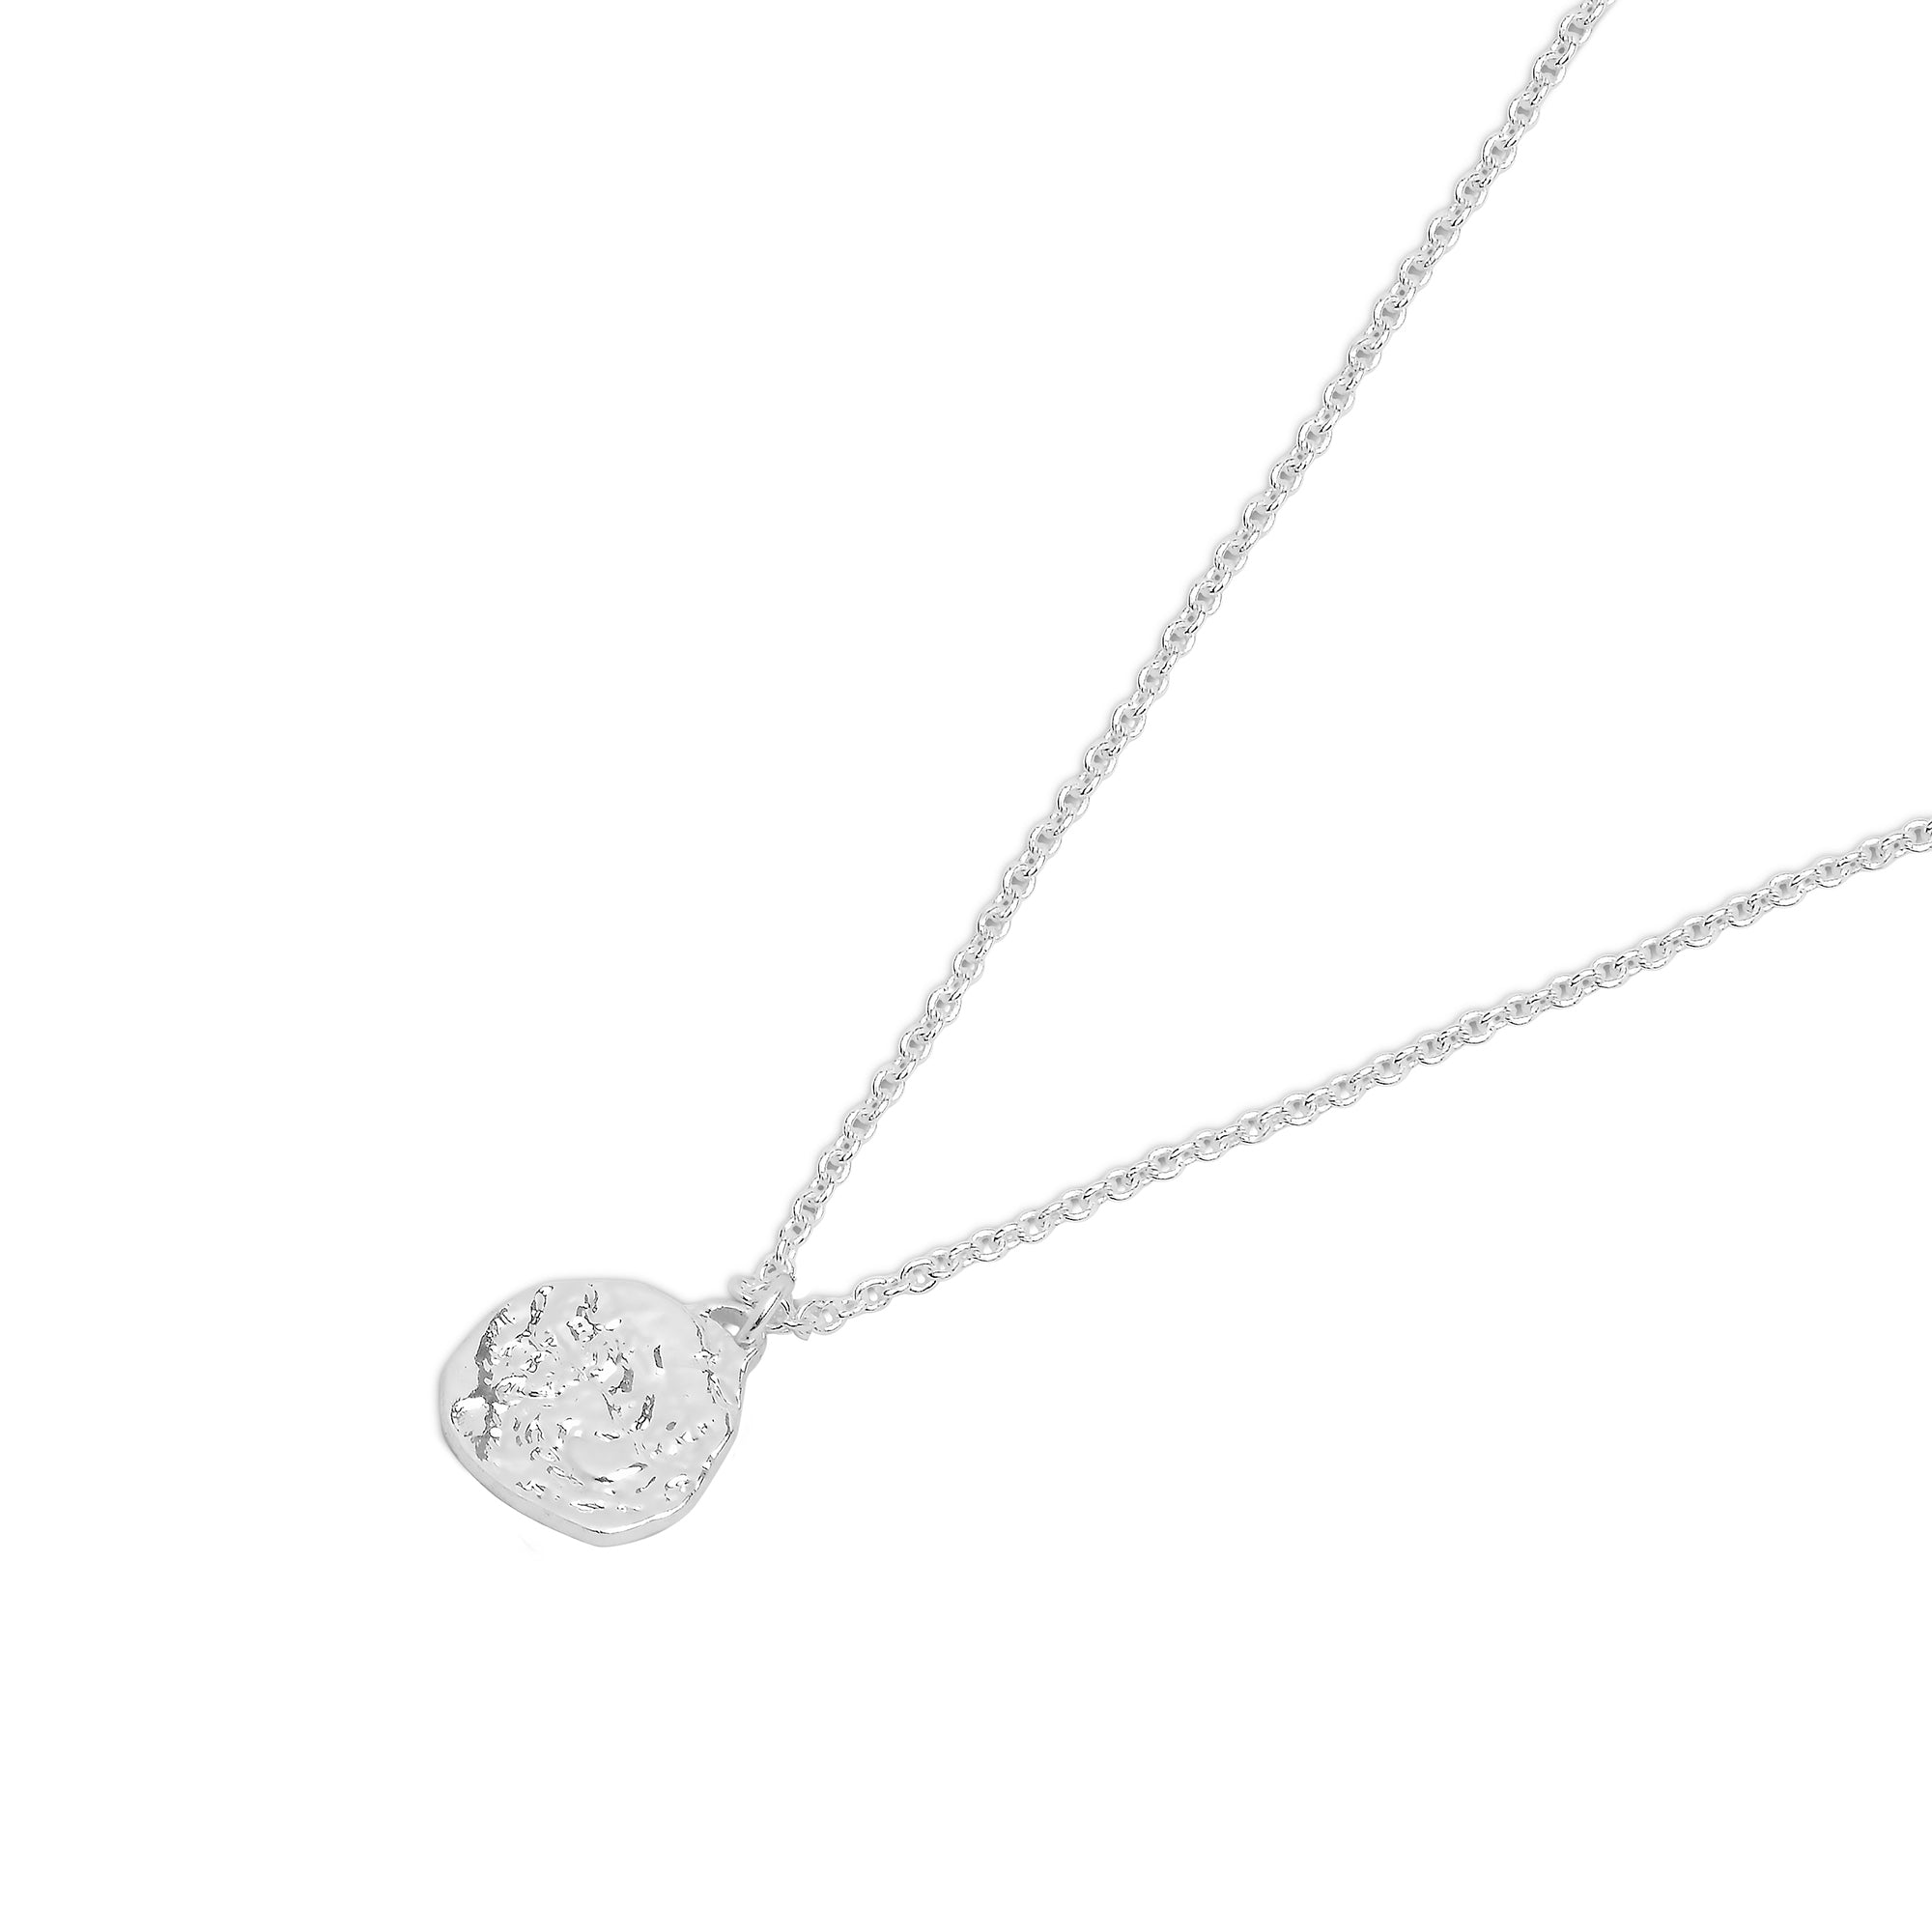 925 Pure Sterling Silver Plated Textured Pendant Necklace